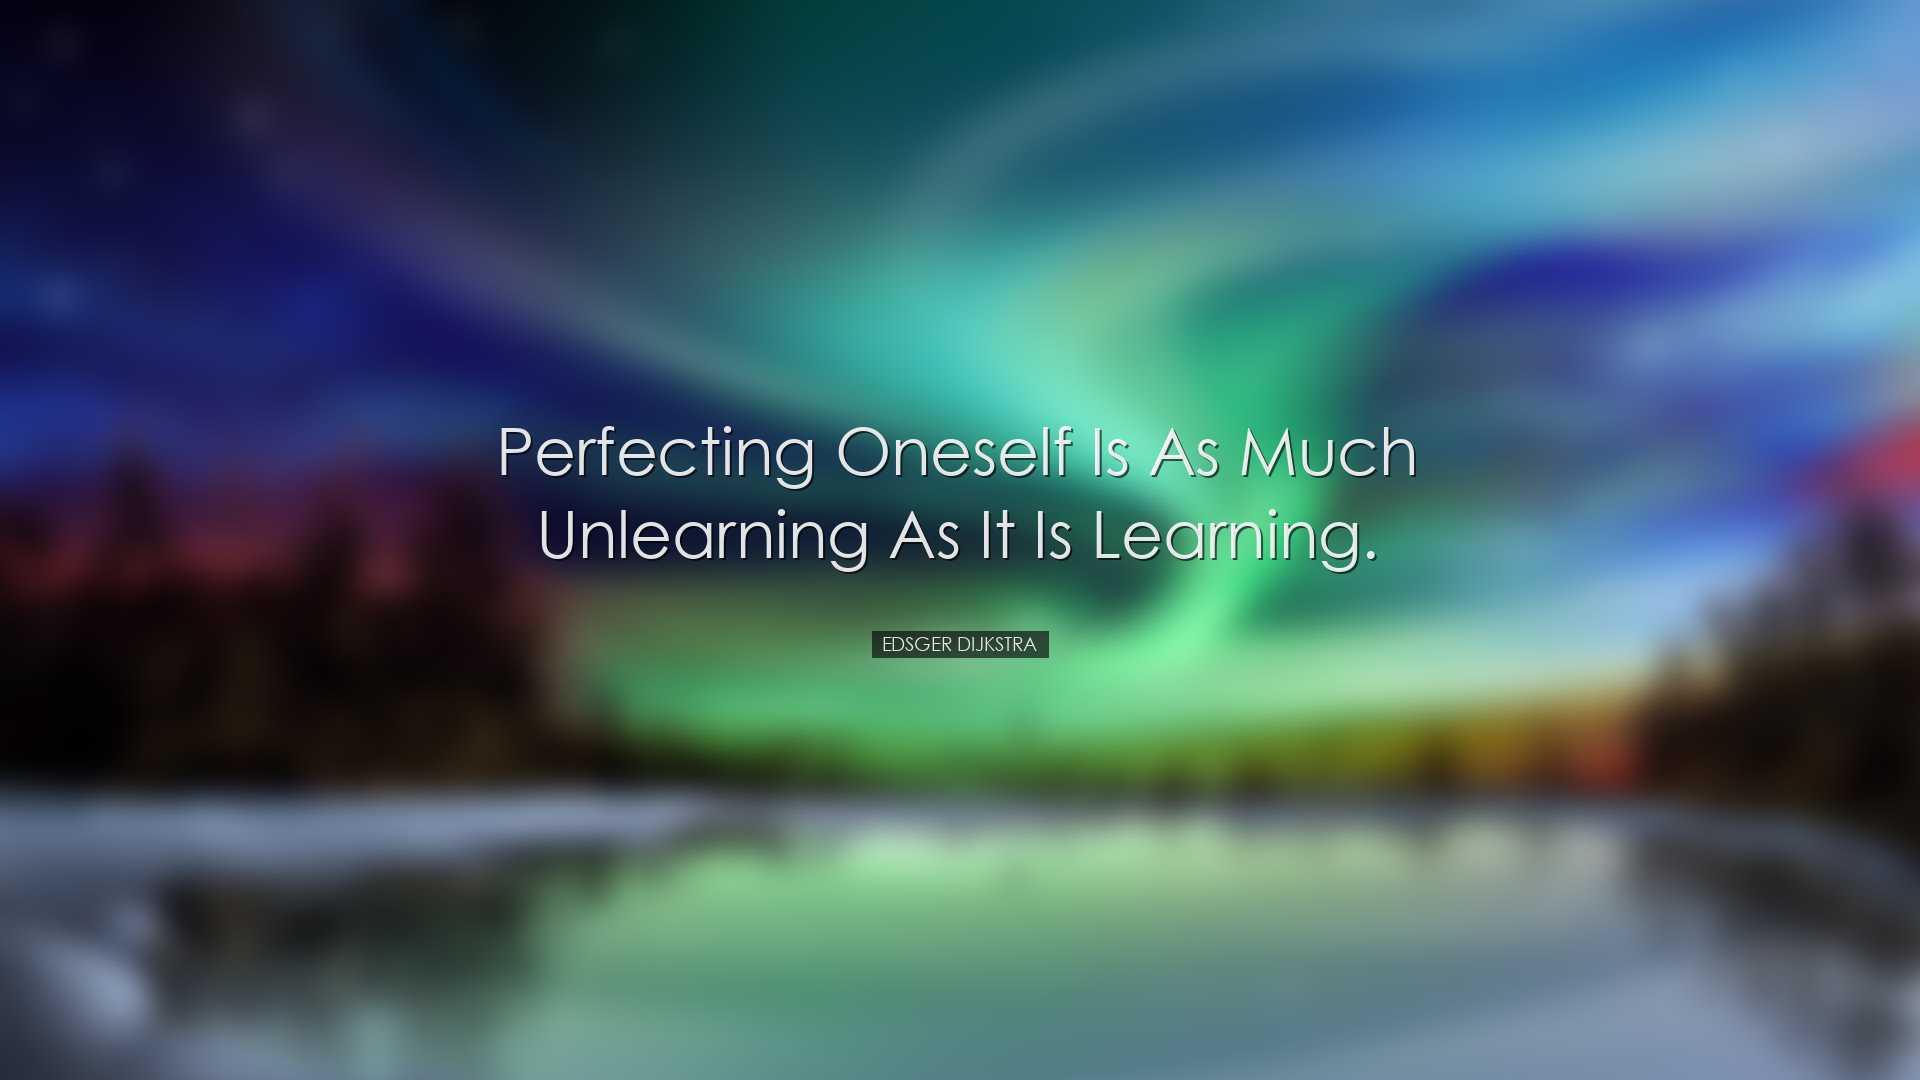 Perfecting oneself is as much unlearning as it is learning. - Edsg